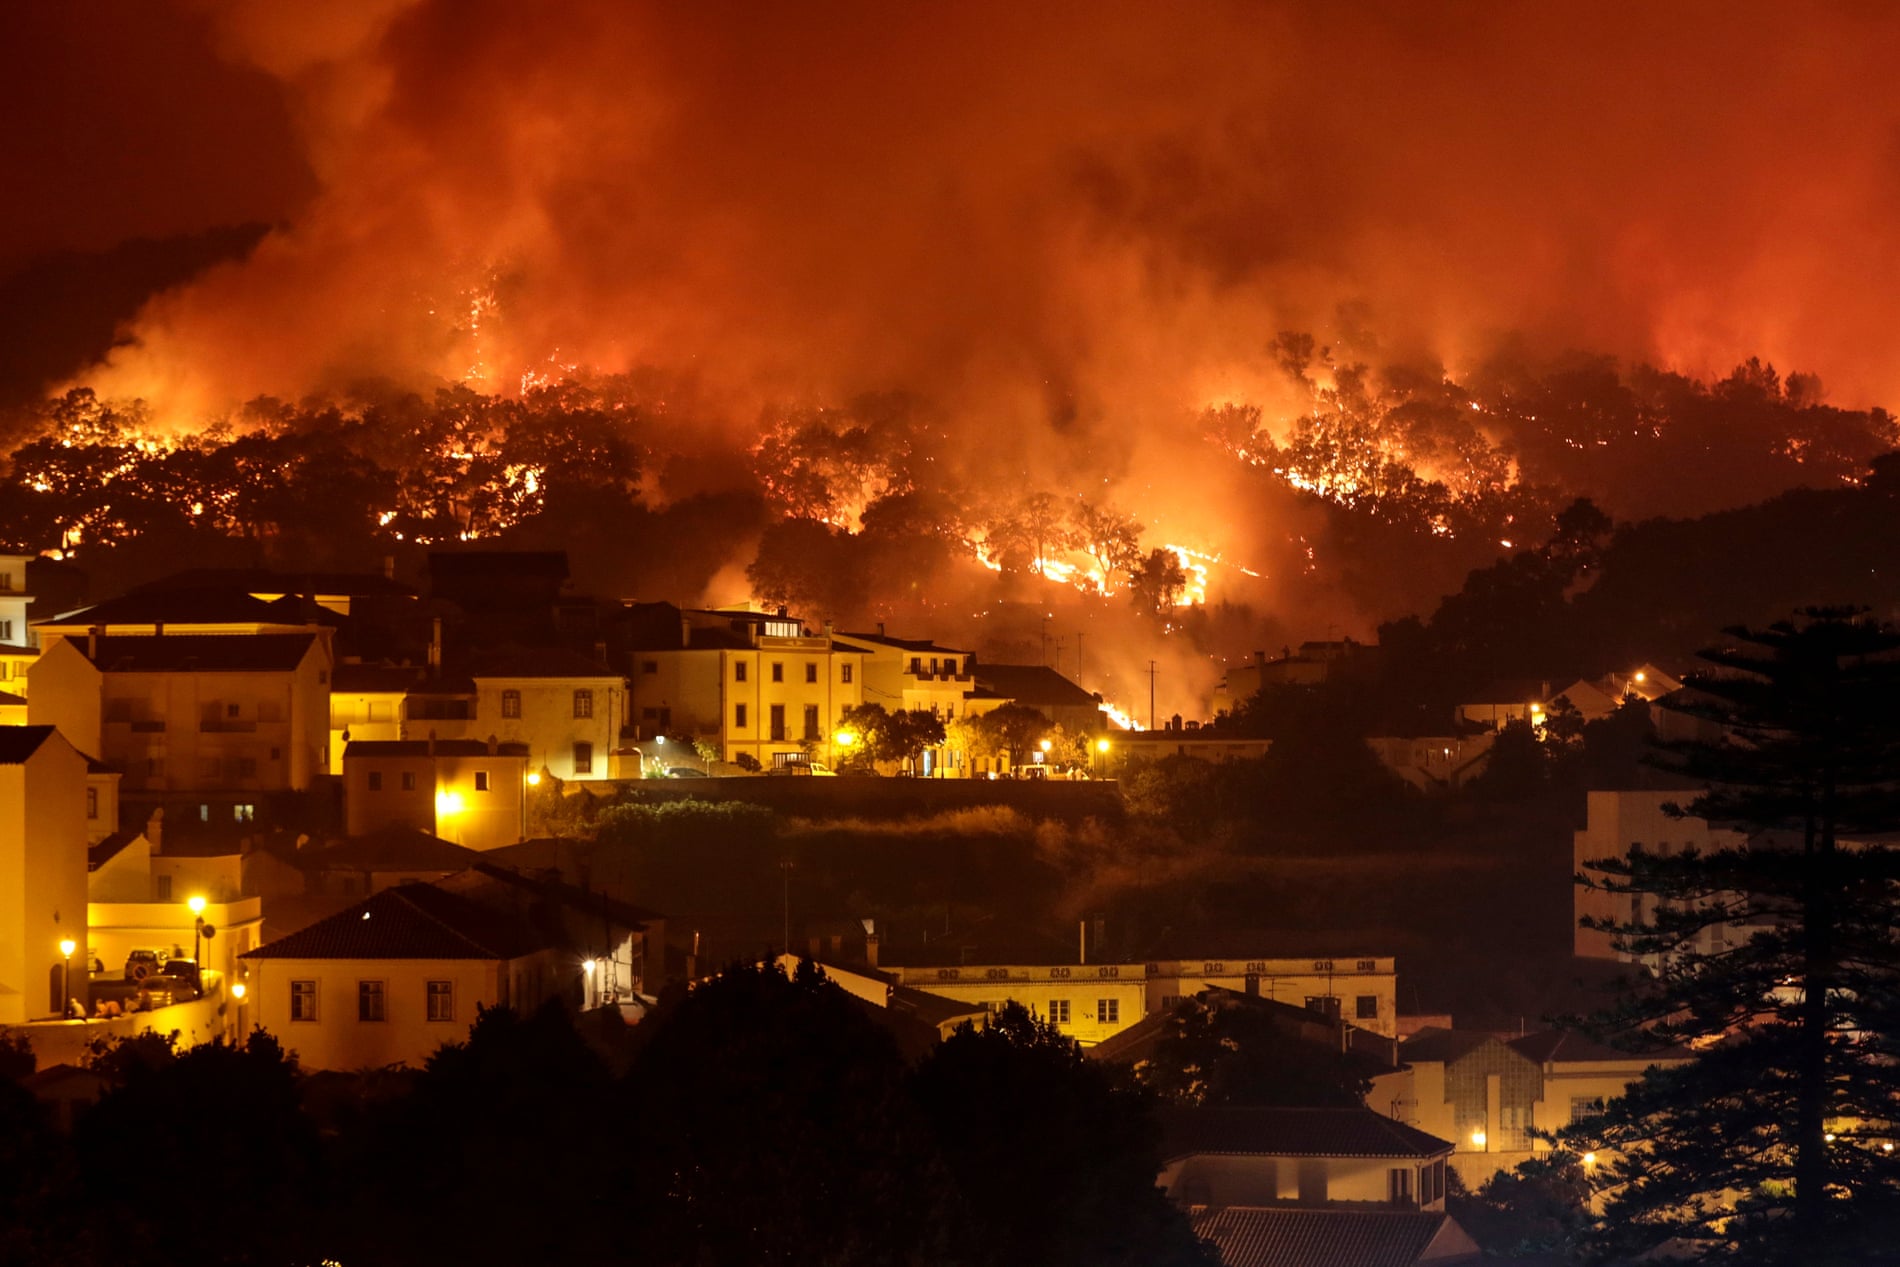 A forest fire burns on a hill in Monchique, Portugal, August 2018